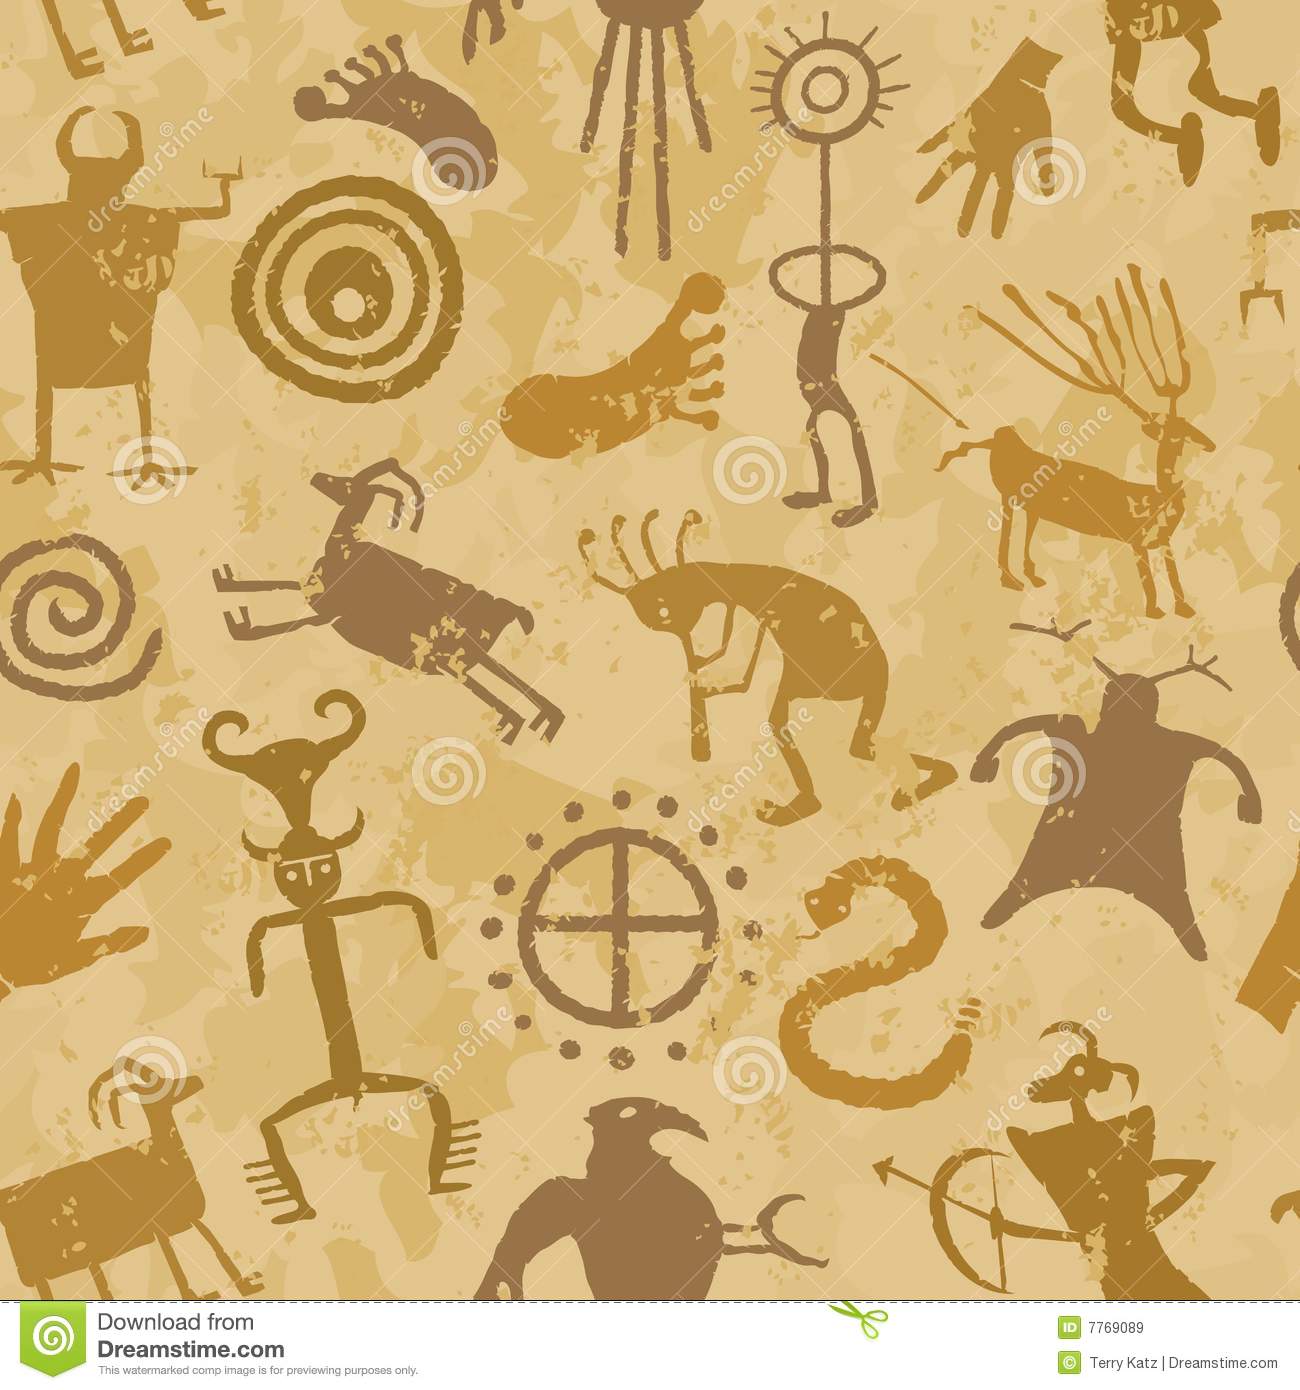 Tribal Caves clipart #14, Download drawings